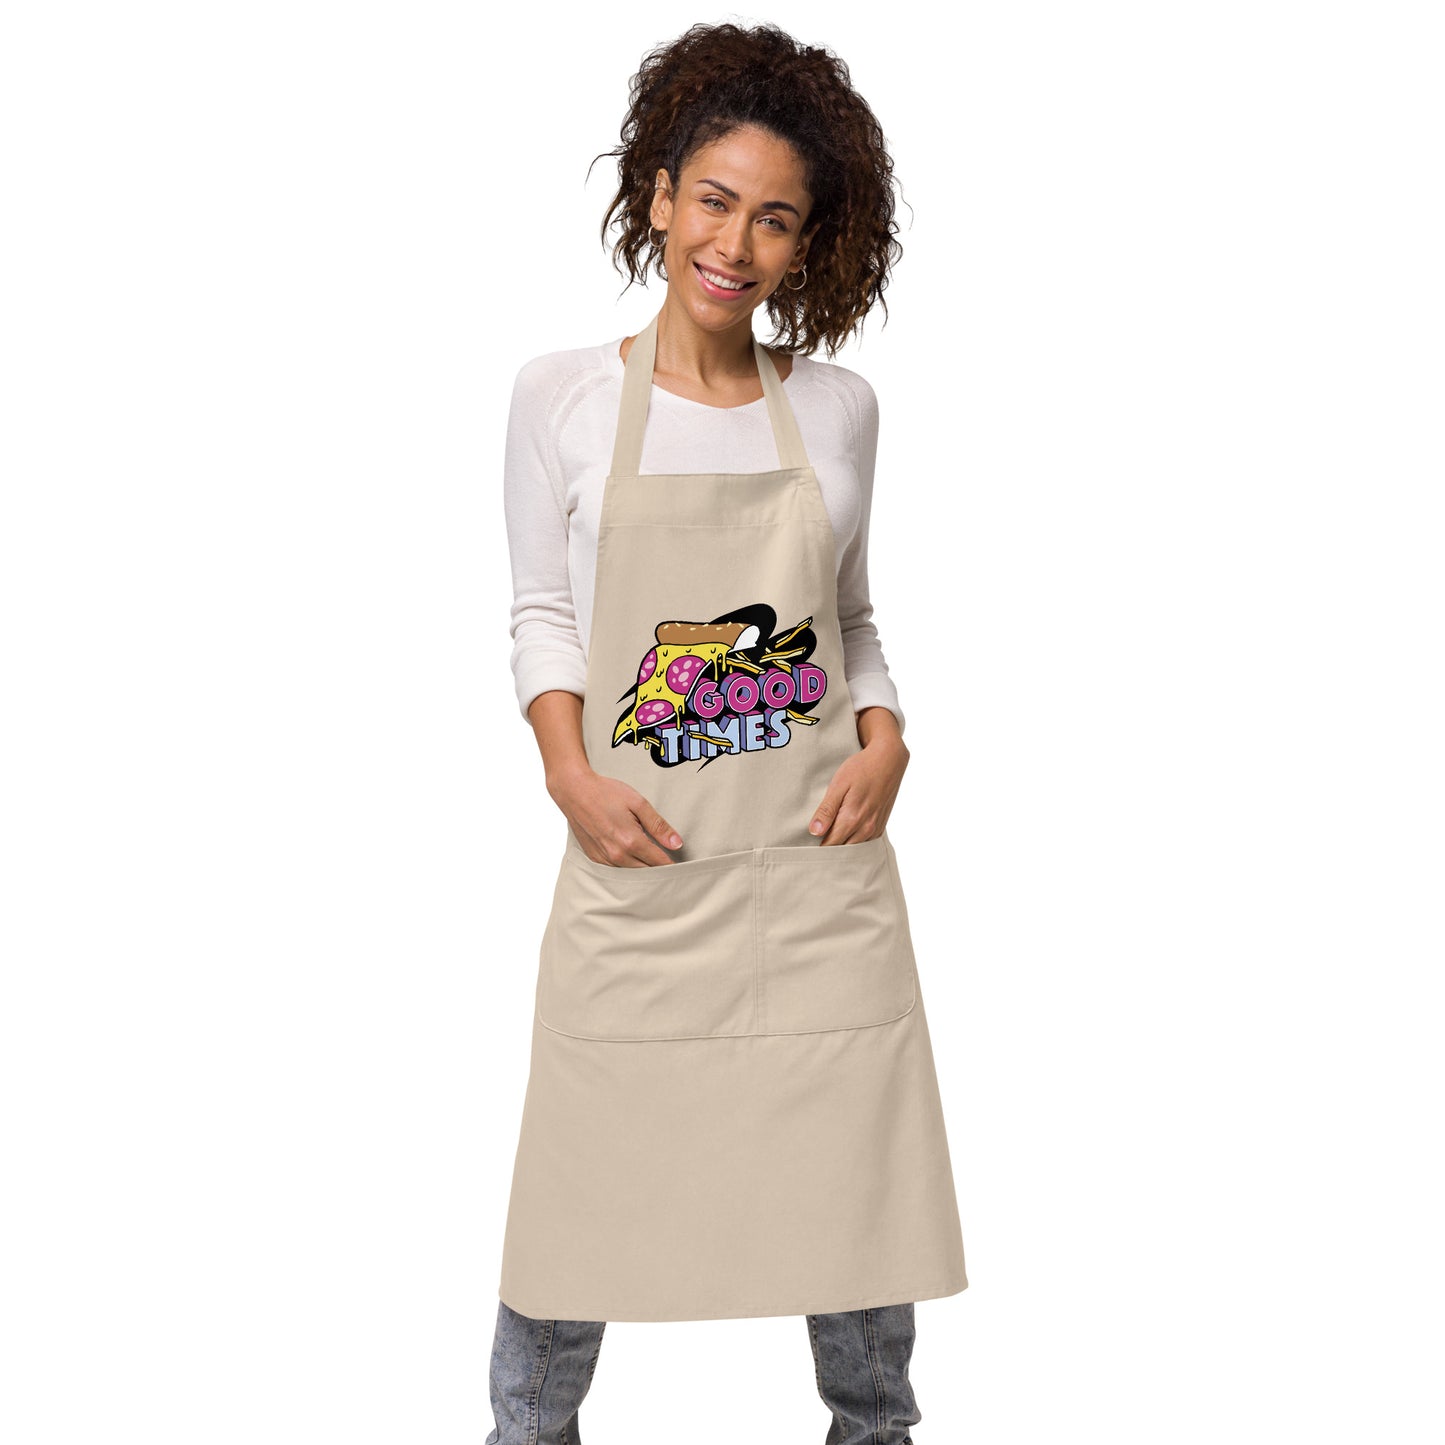 rope apron with pizza and text "Good times"